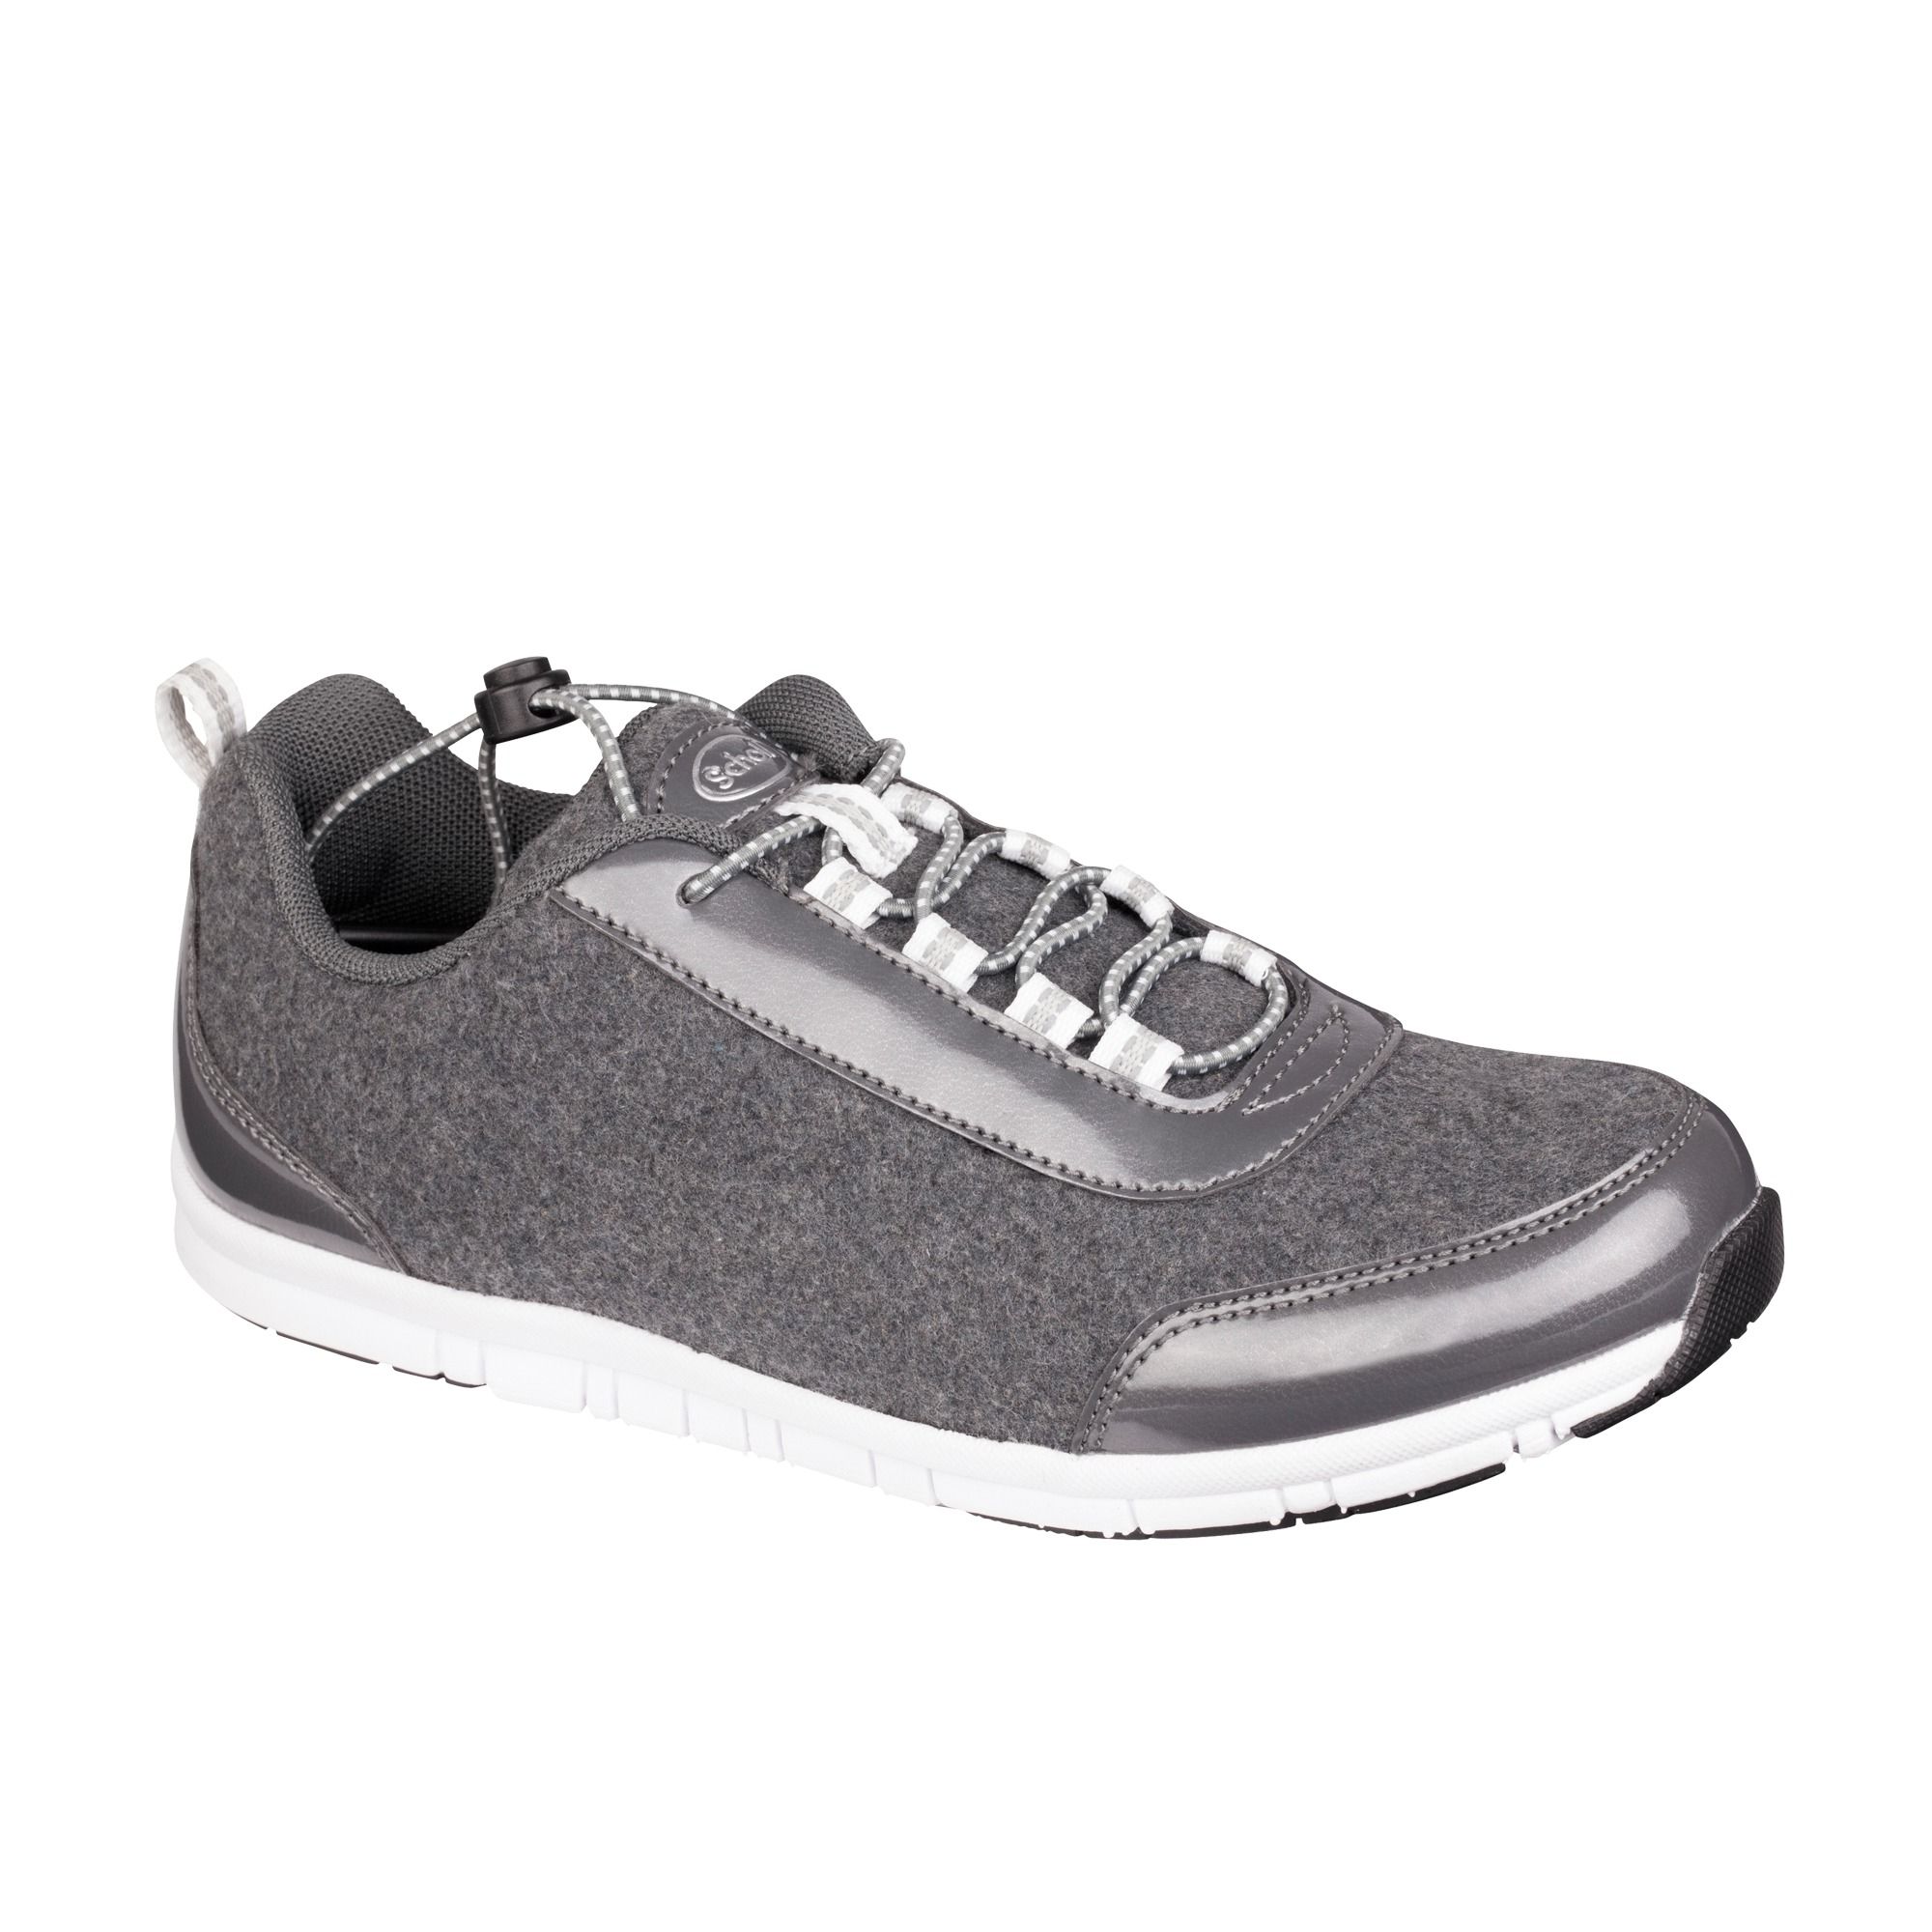 Anatomic Women's Sports Shoes Windstep Two Scholl